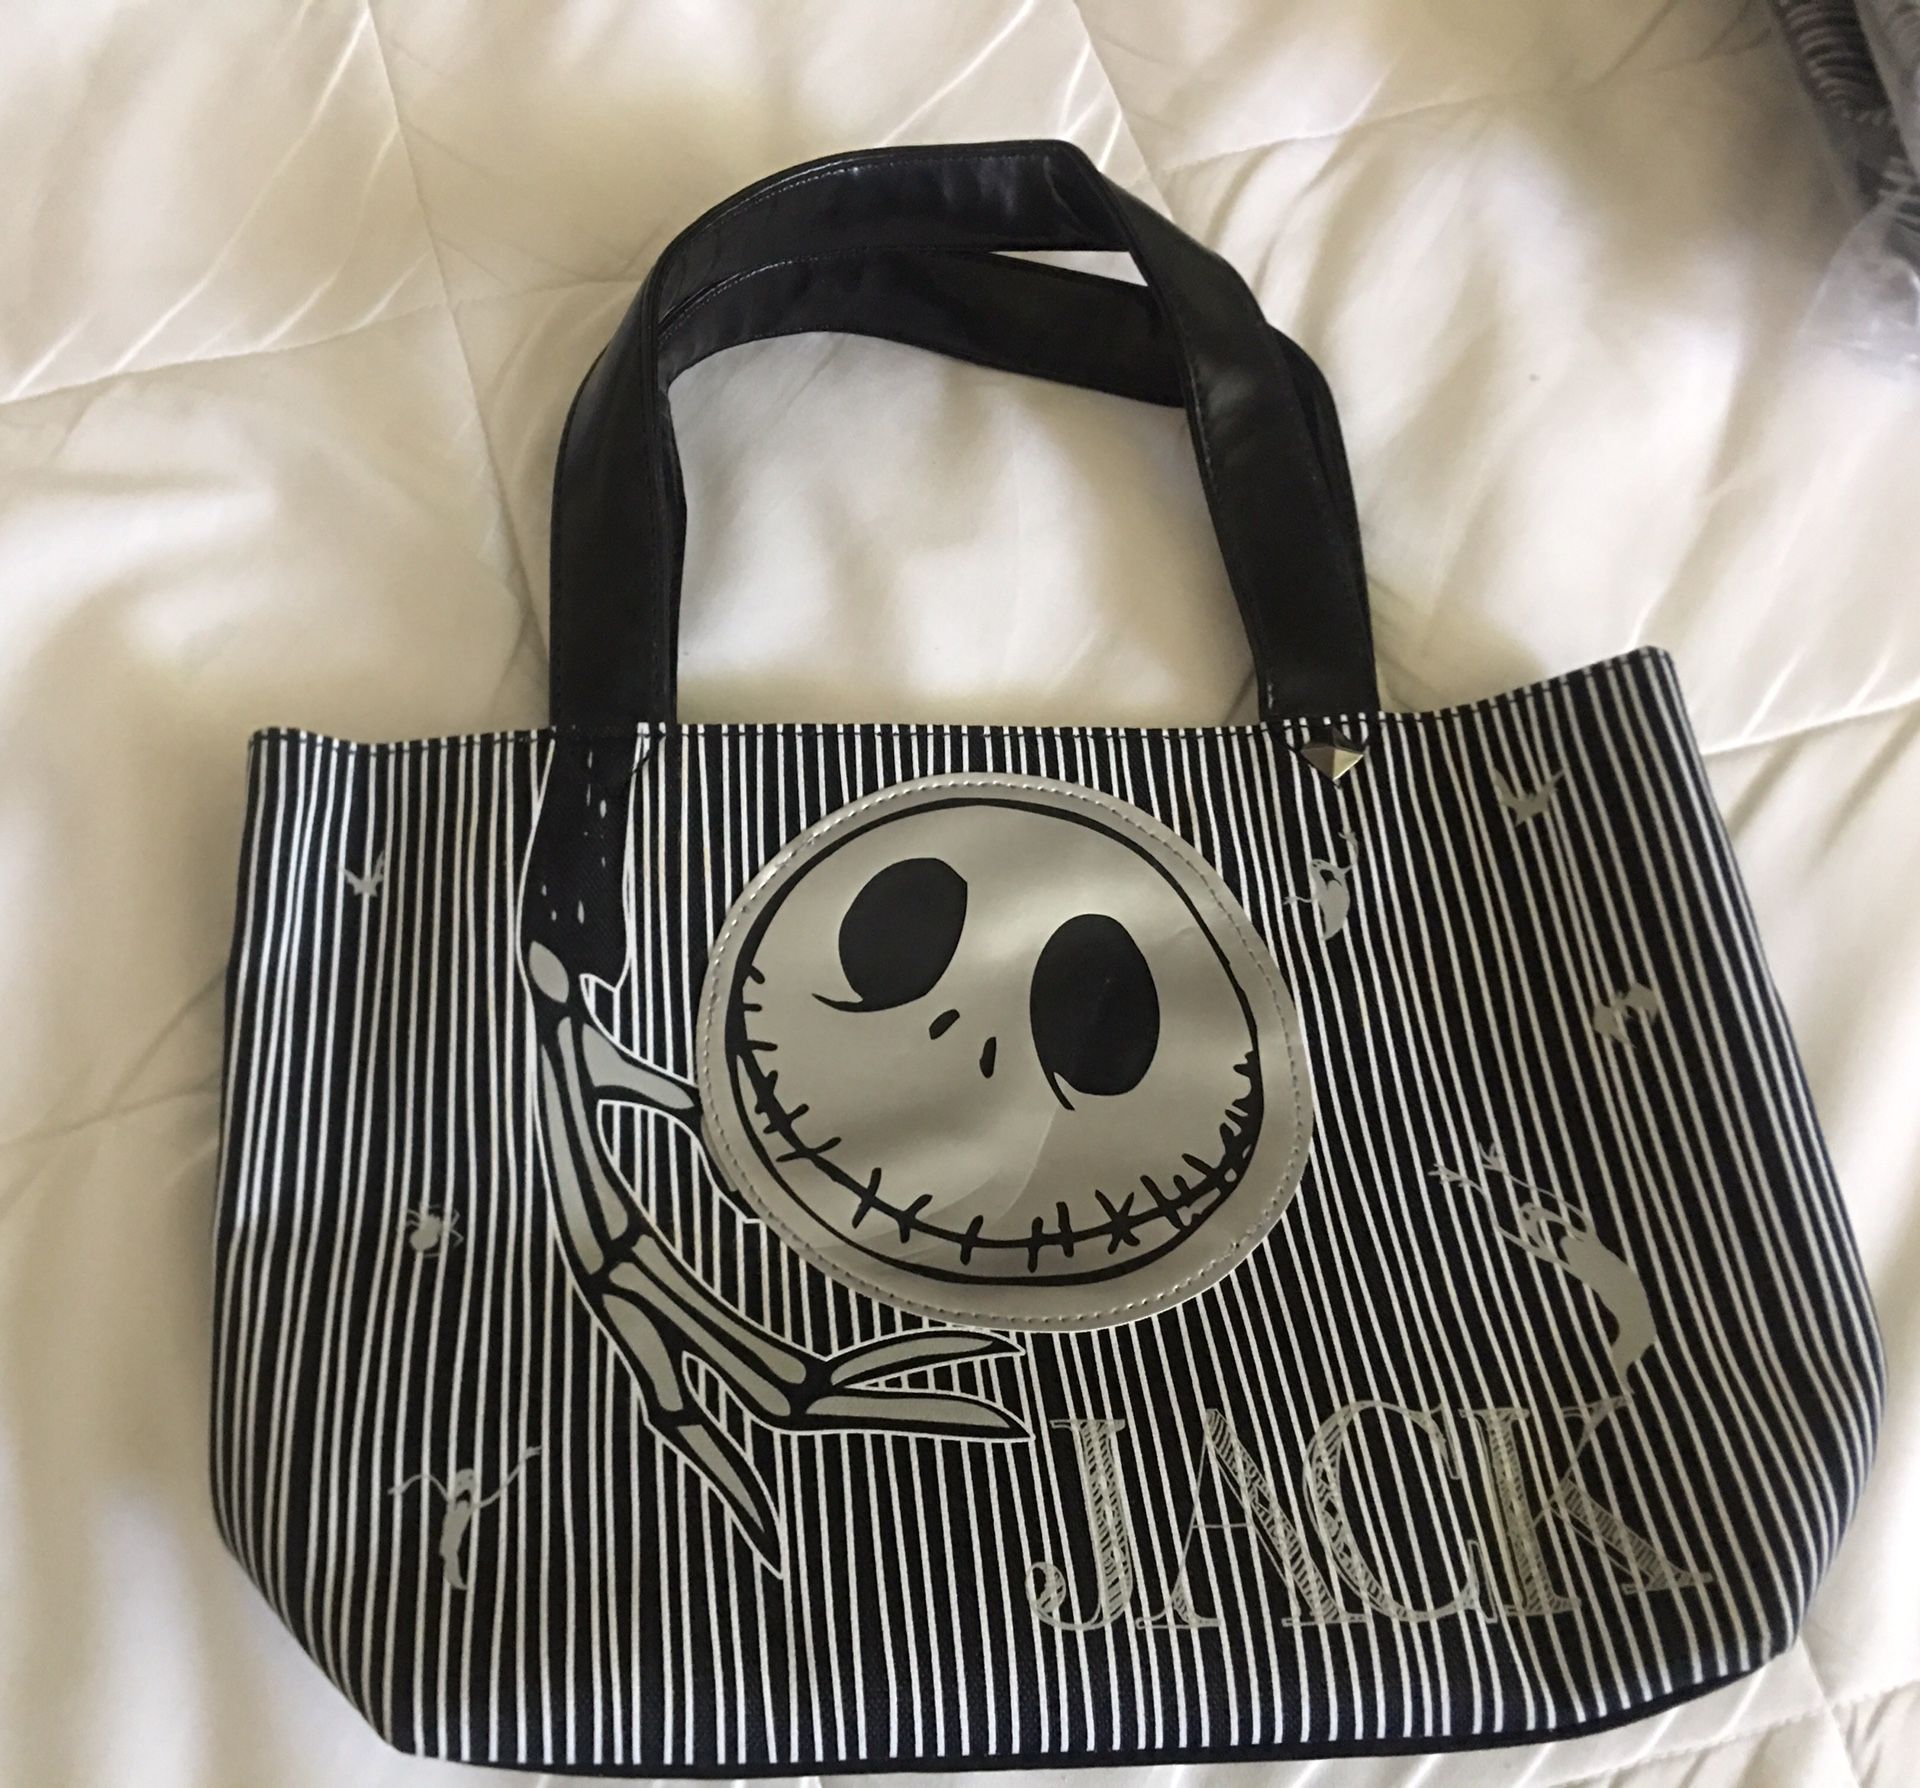 Nightmare before Christmas small tote